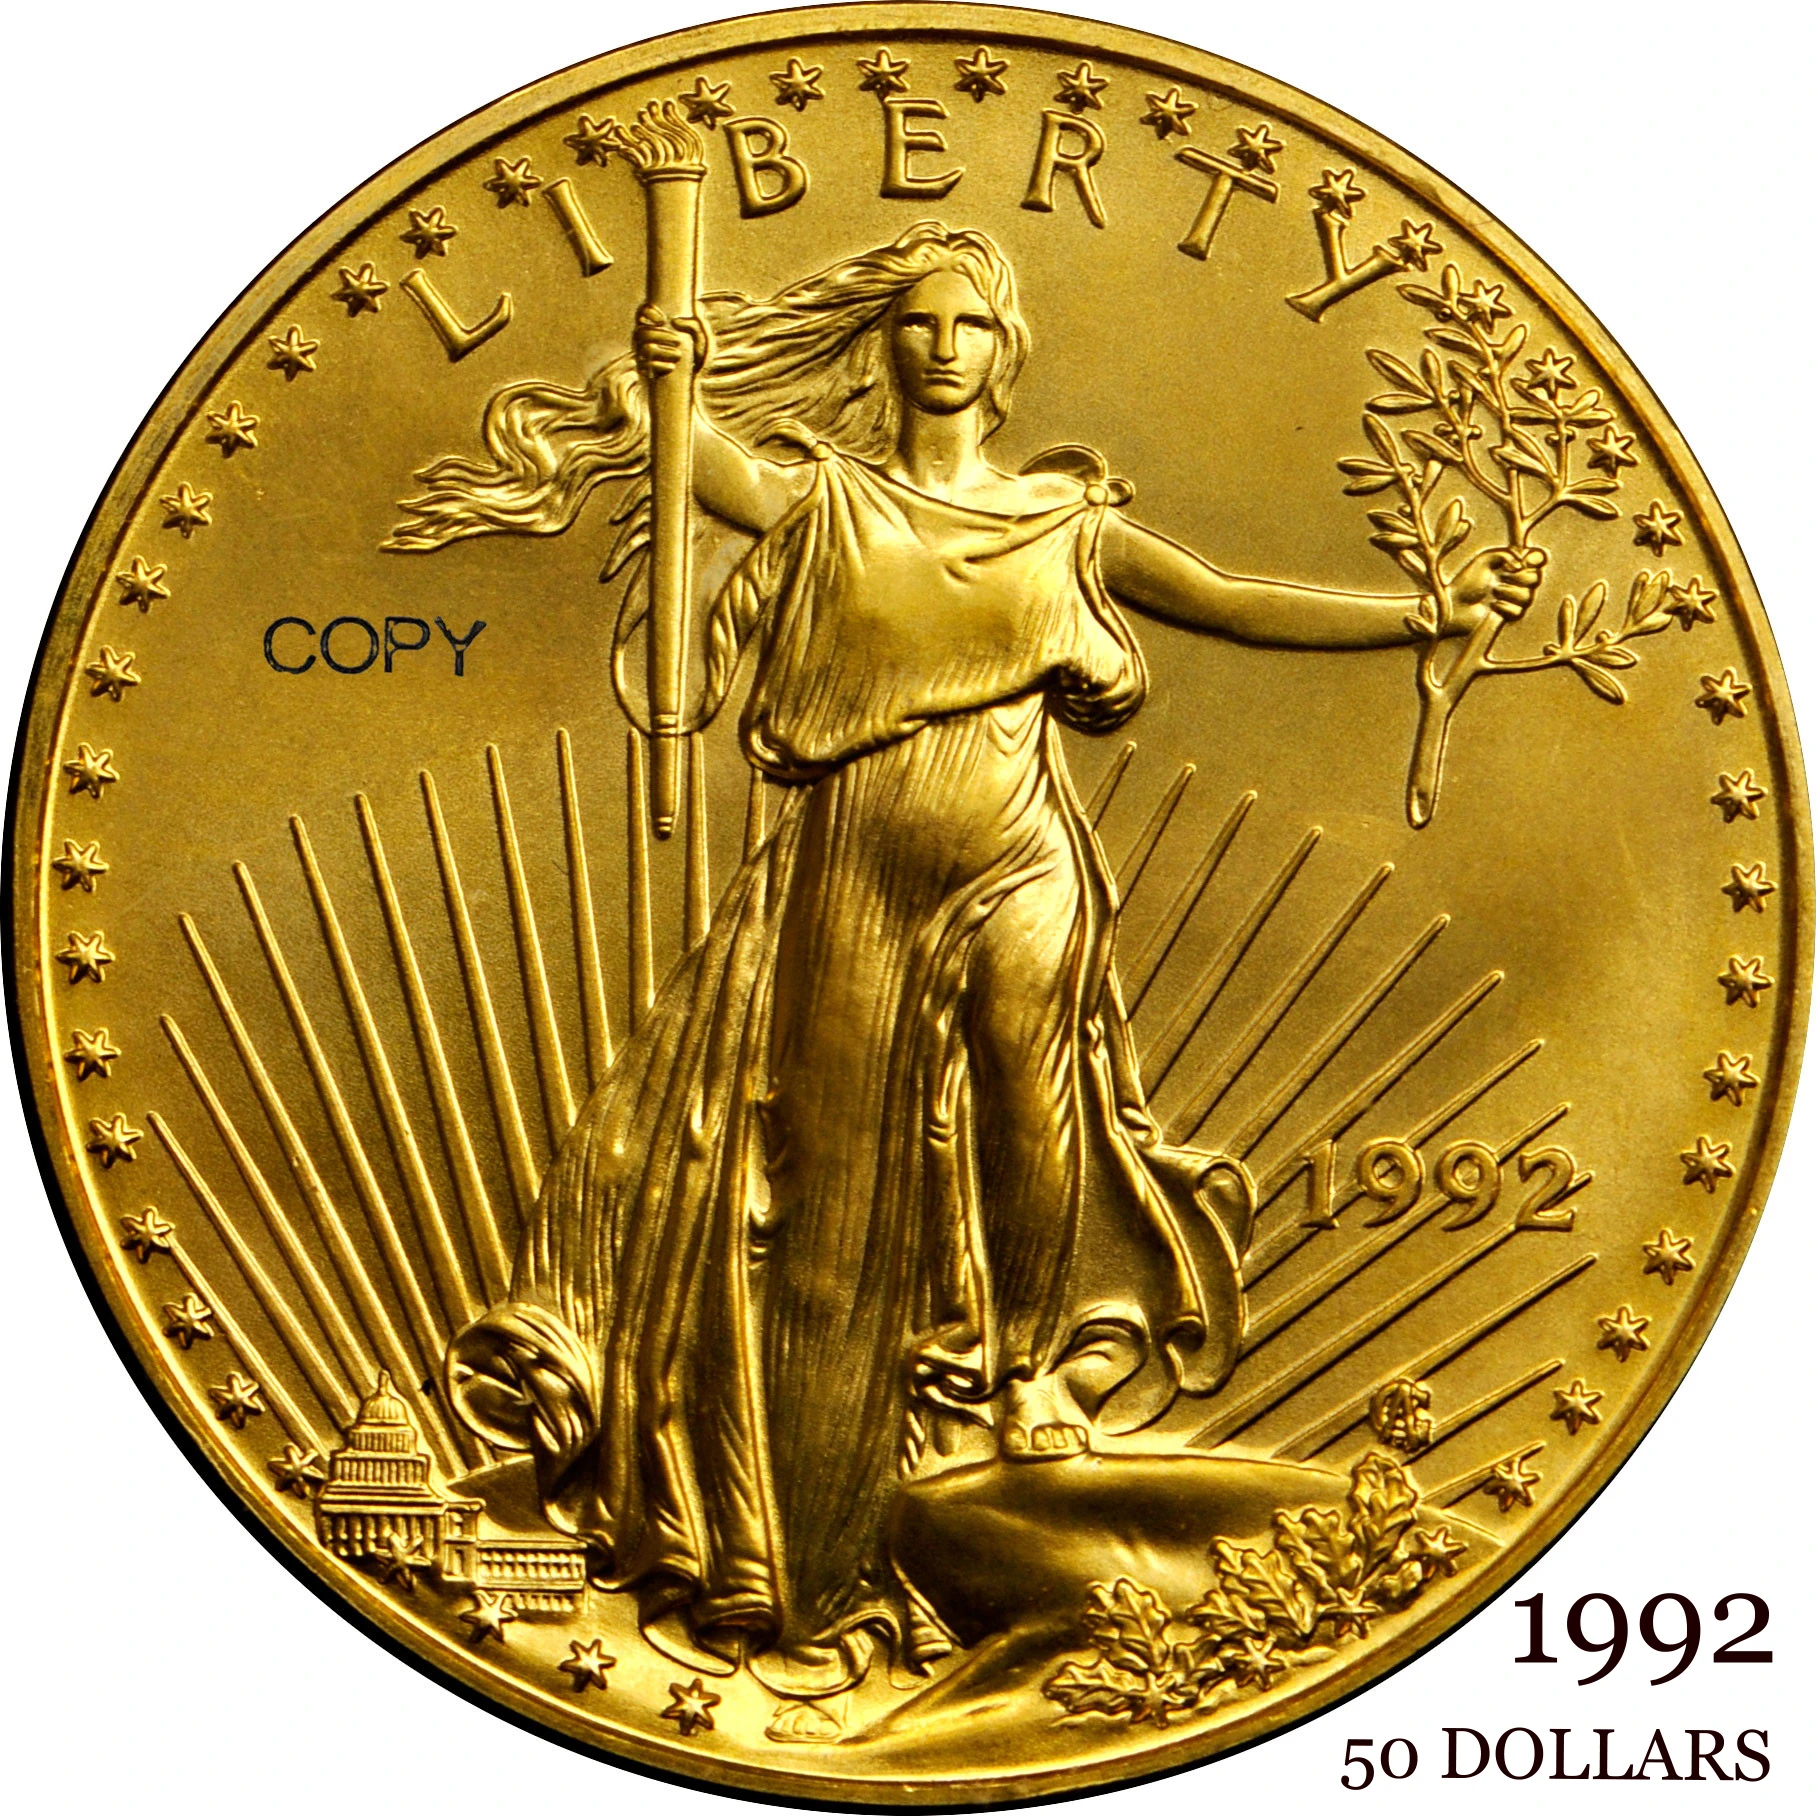 United States US 1992 $50 50 Dollars One Ounce American Fine Gold Eagle Bullion Coinage USA Liberty Brass Metal Copy Coin